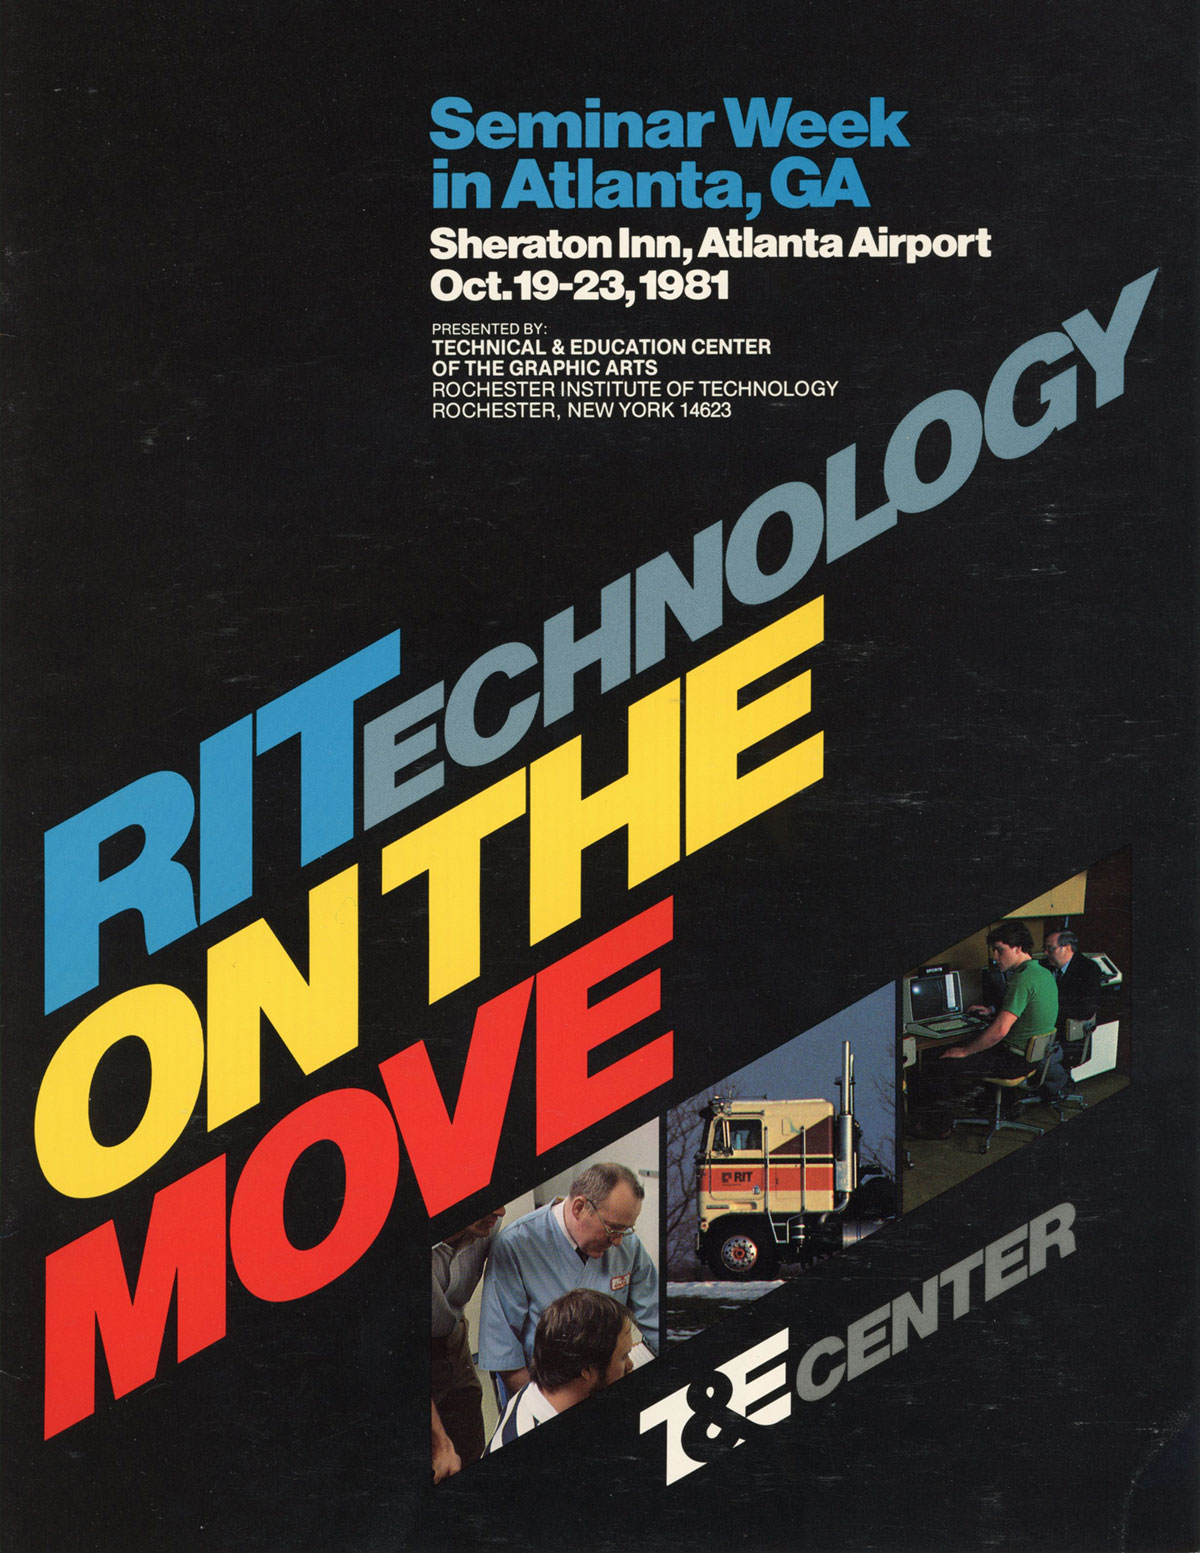 Event Advertising for RITechnology On the Move in Atlanta, GA